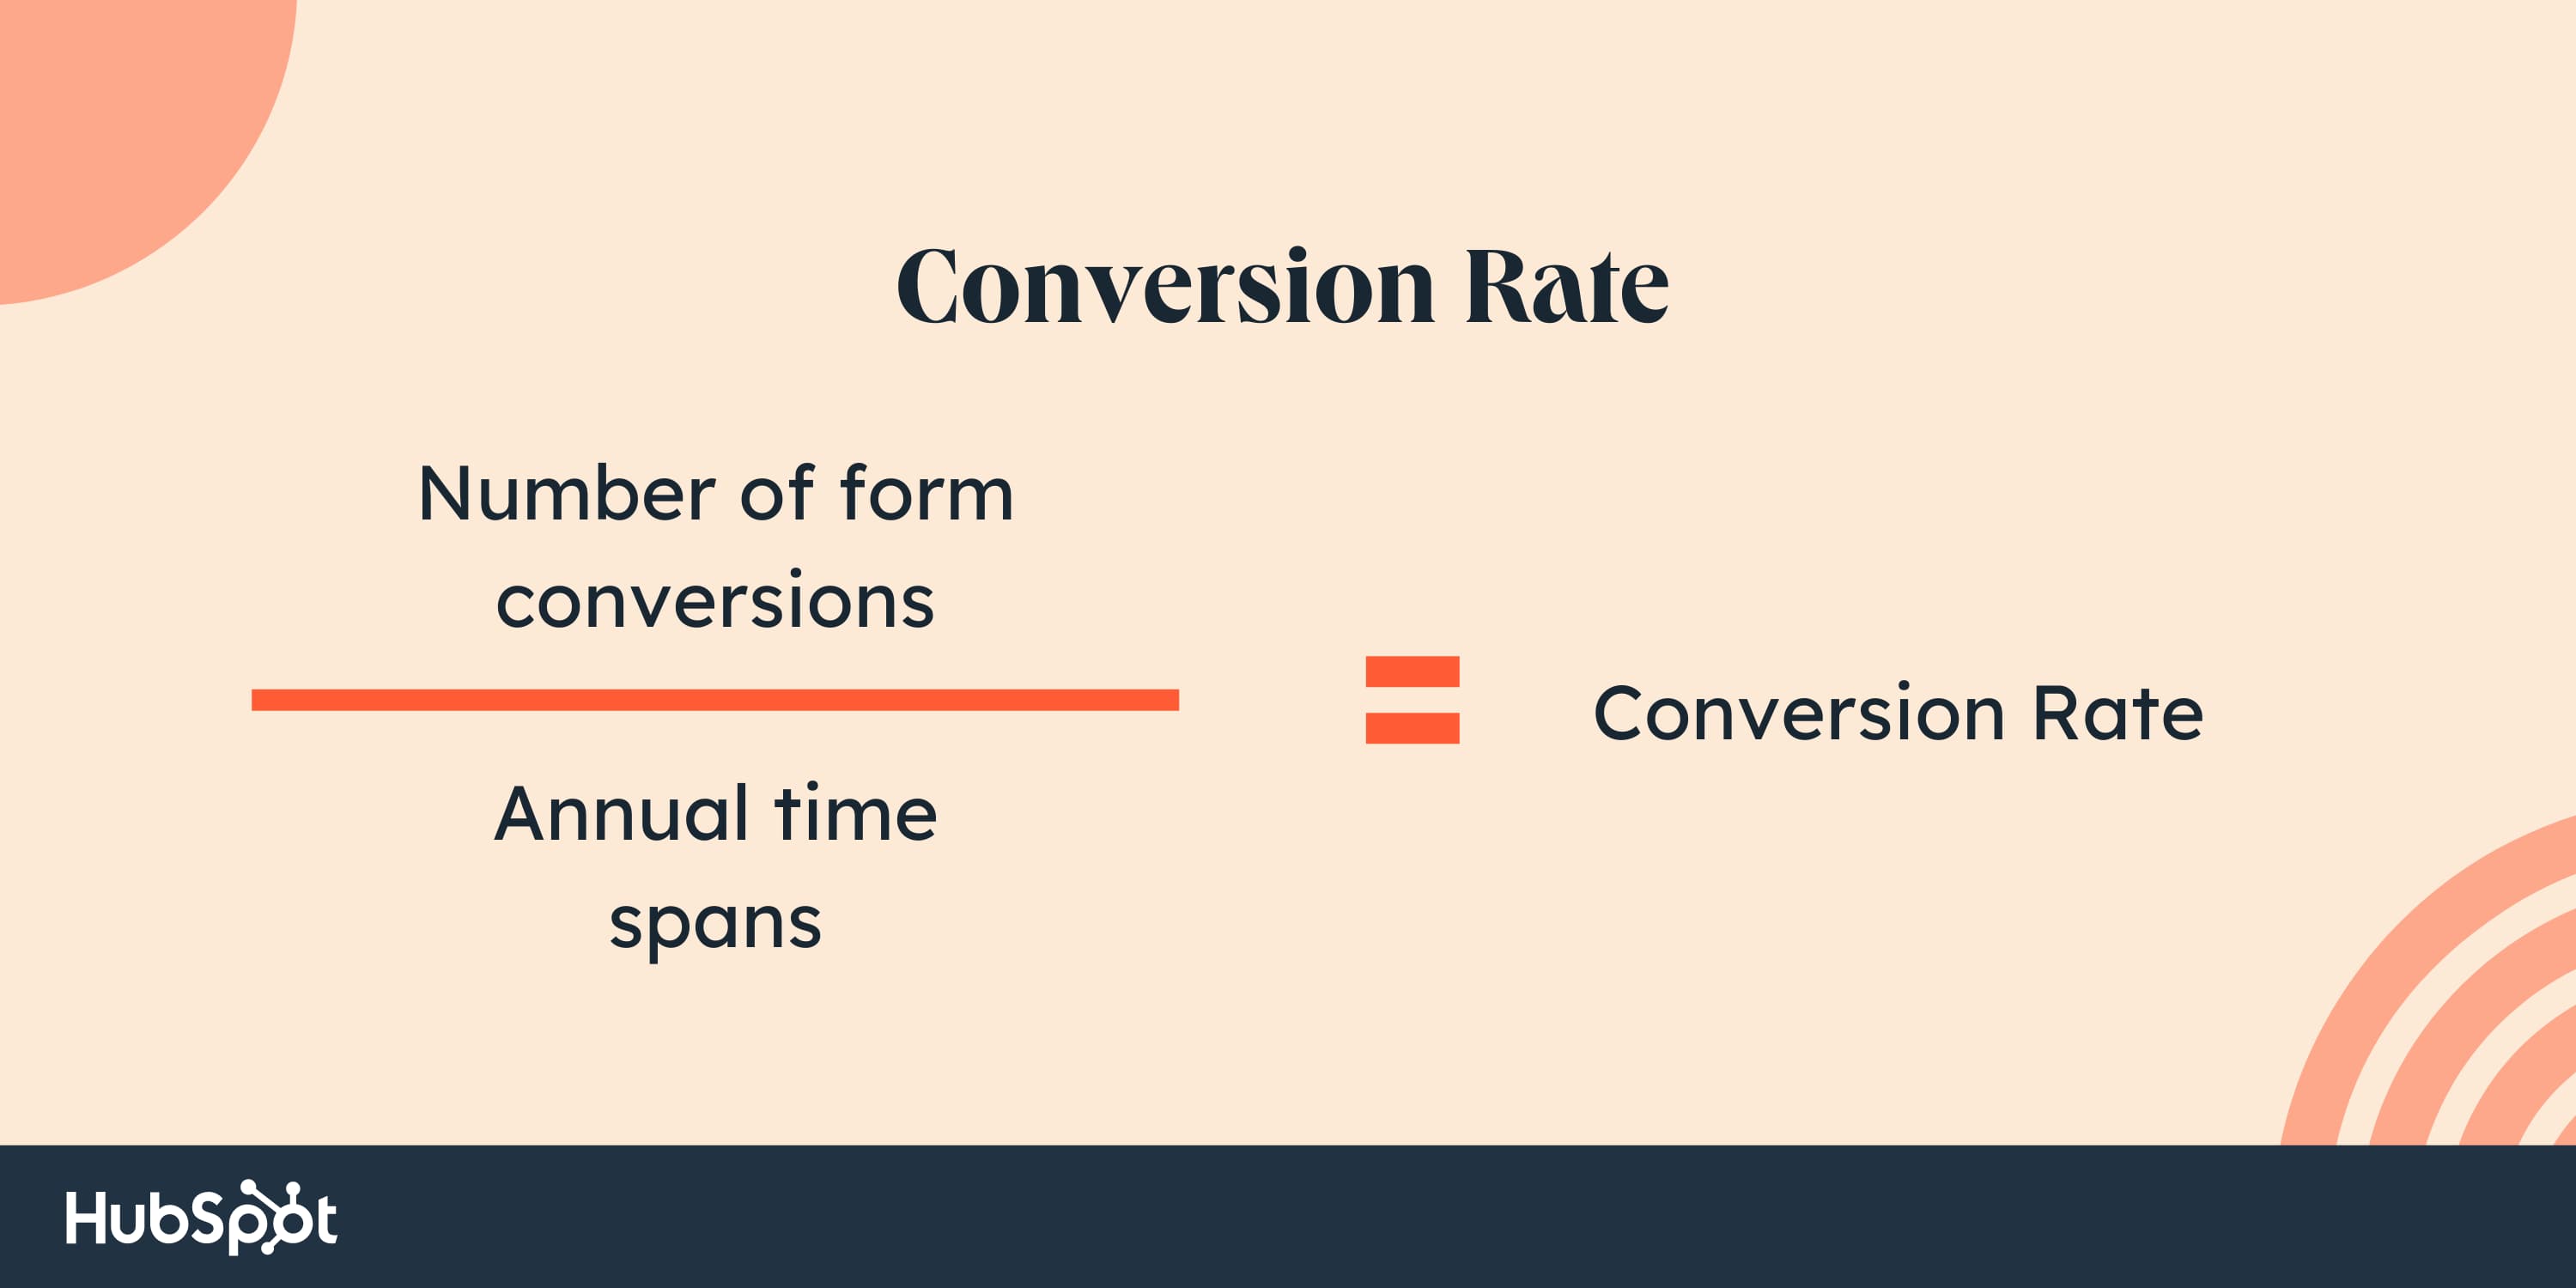 email newsletter signup form conversion rate.jpg?width=3000&name=email newsletter signup form conversion rate - How to Increase Email Sign-ups With Better Forms (+Examples)